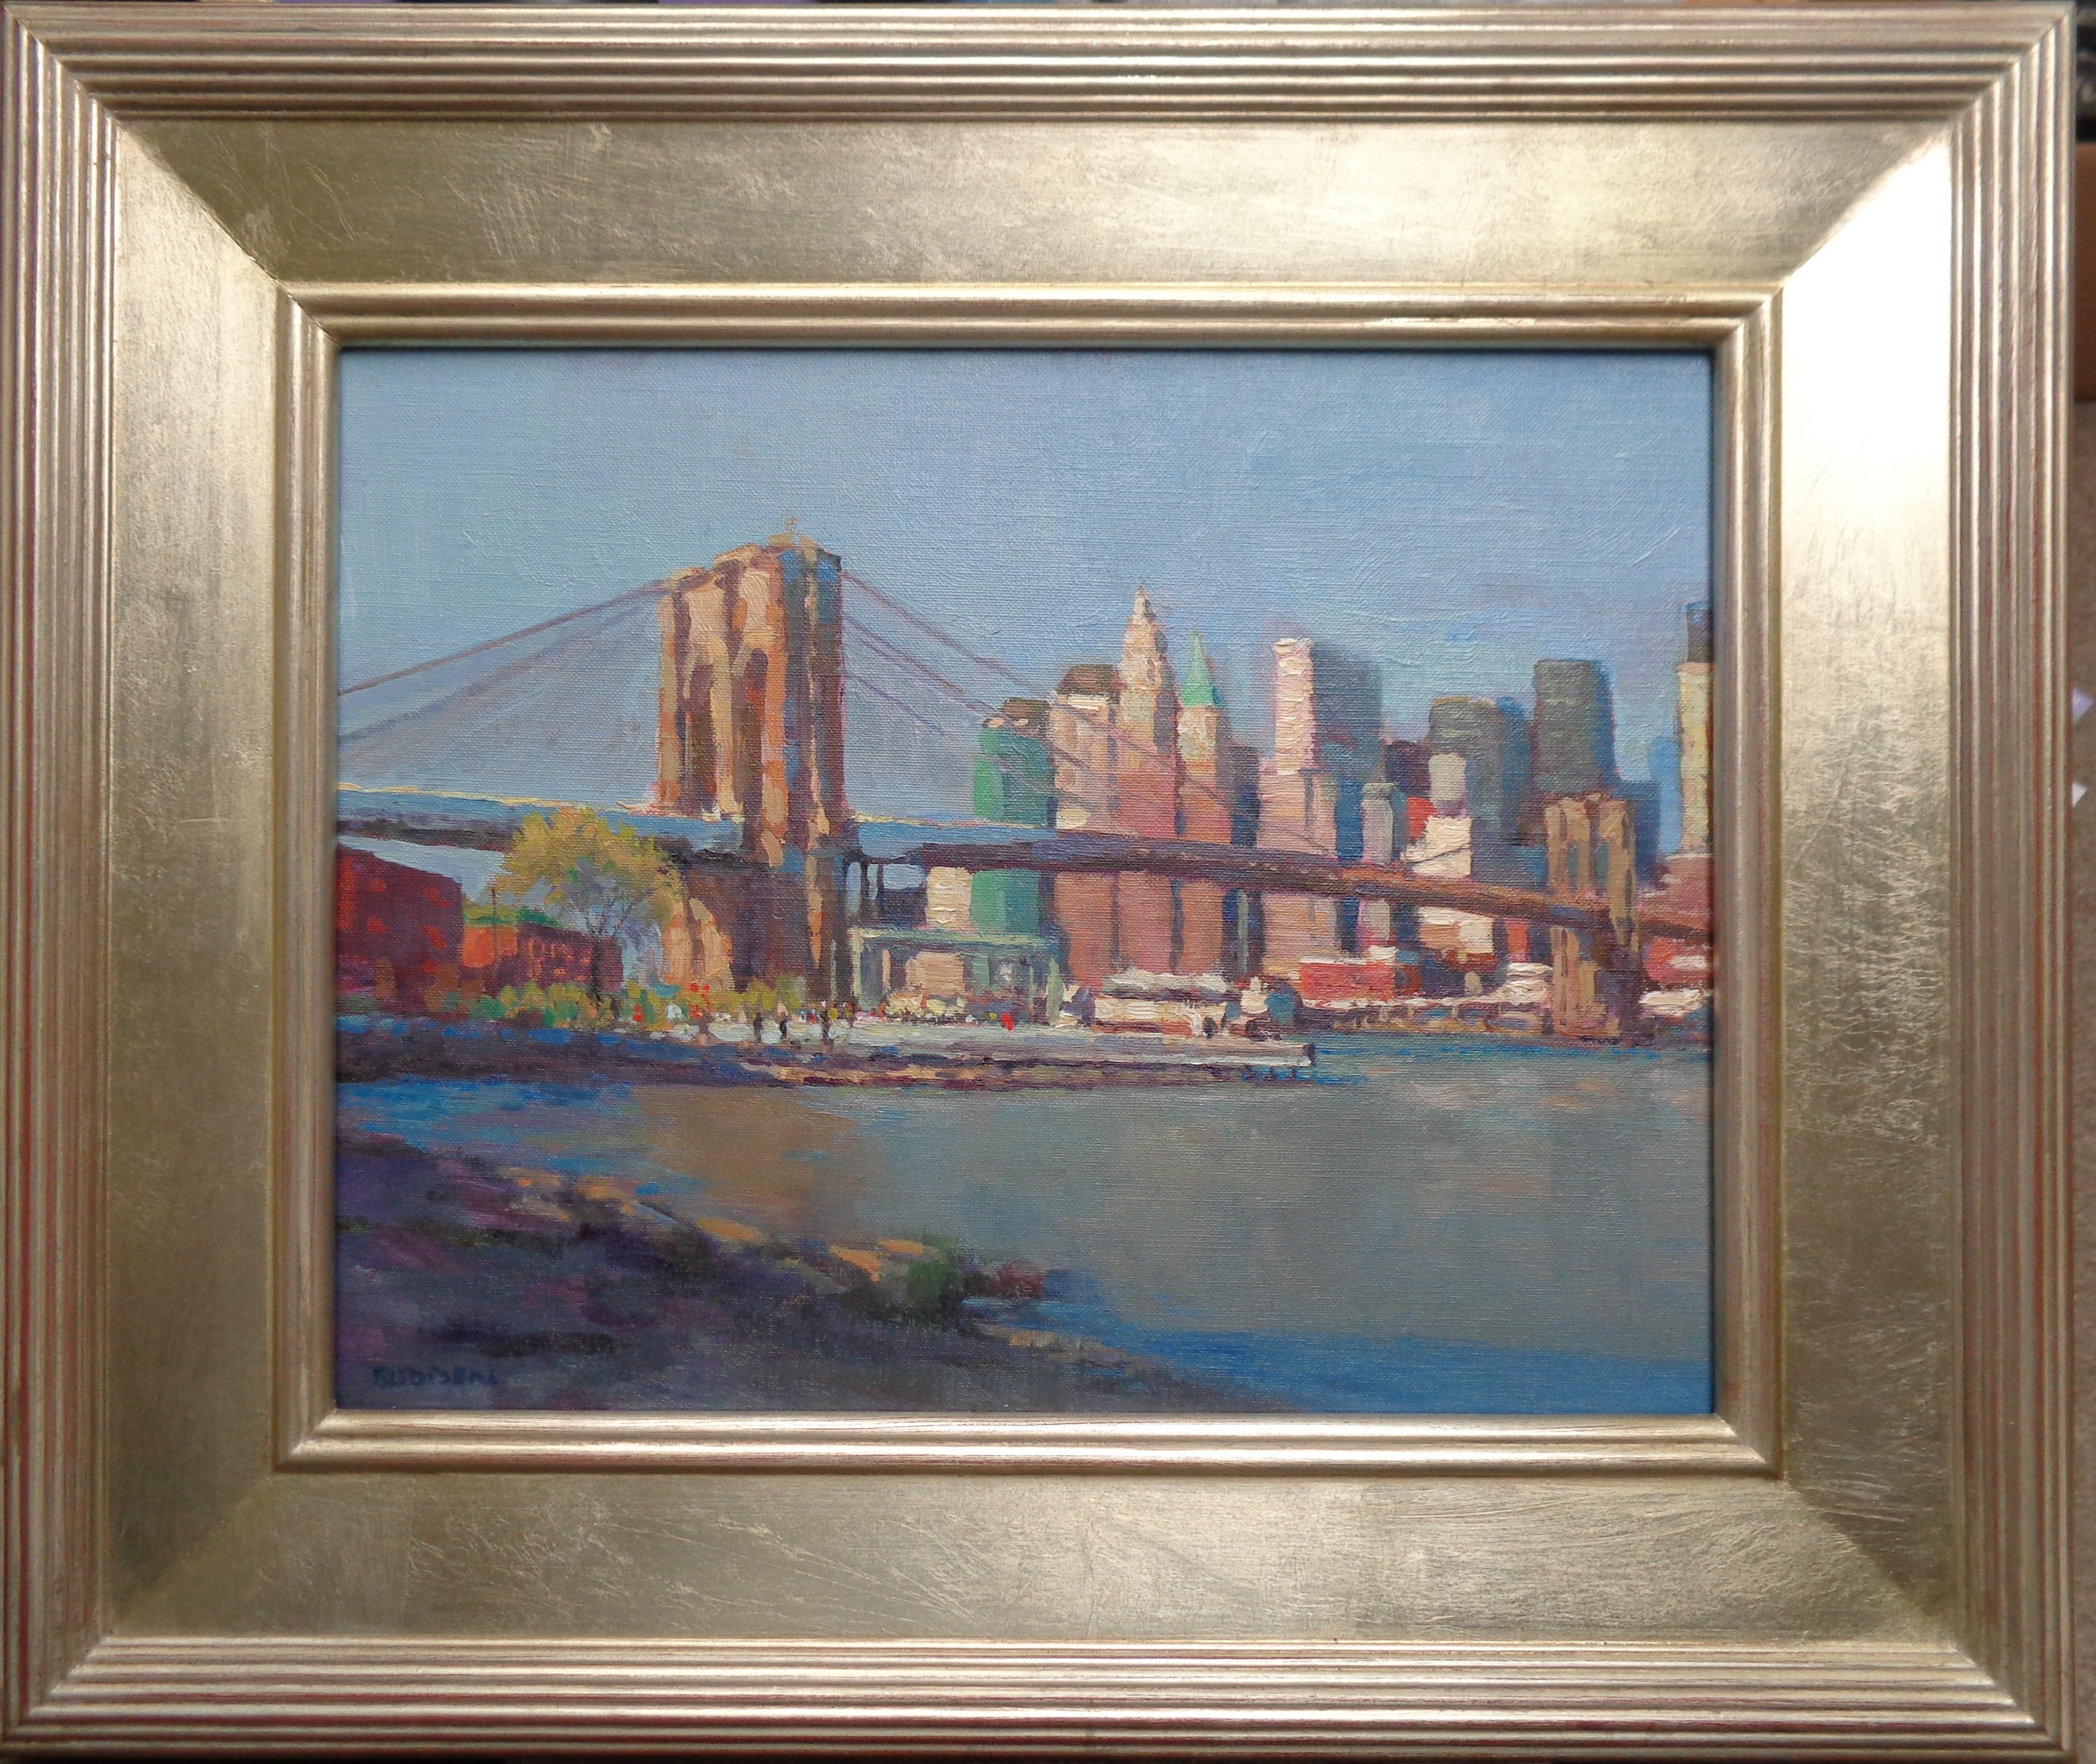 Here is   beautiful plein air painting done on location in Brooklyn of the Brooklyn Bridge back in 2011. It has hung in my collection since and one of my favorite plein airs to date. The painting has a beautiful quality of light and paint that you